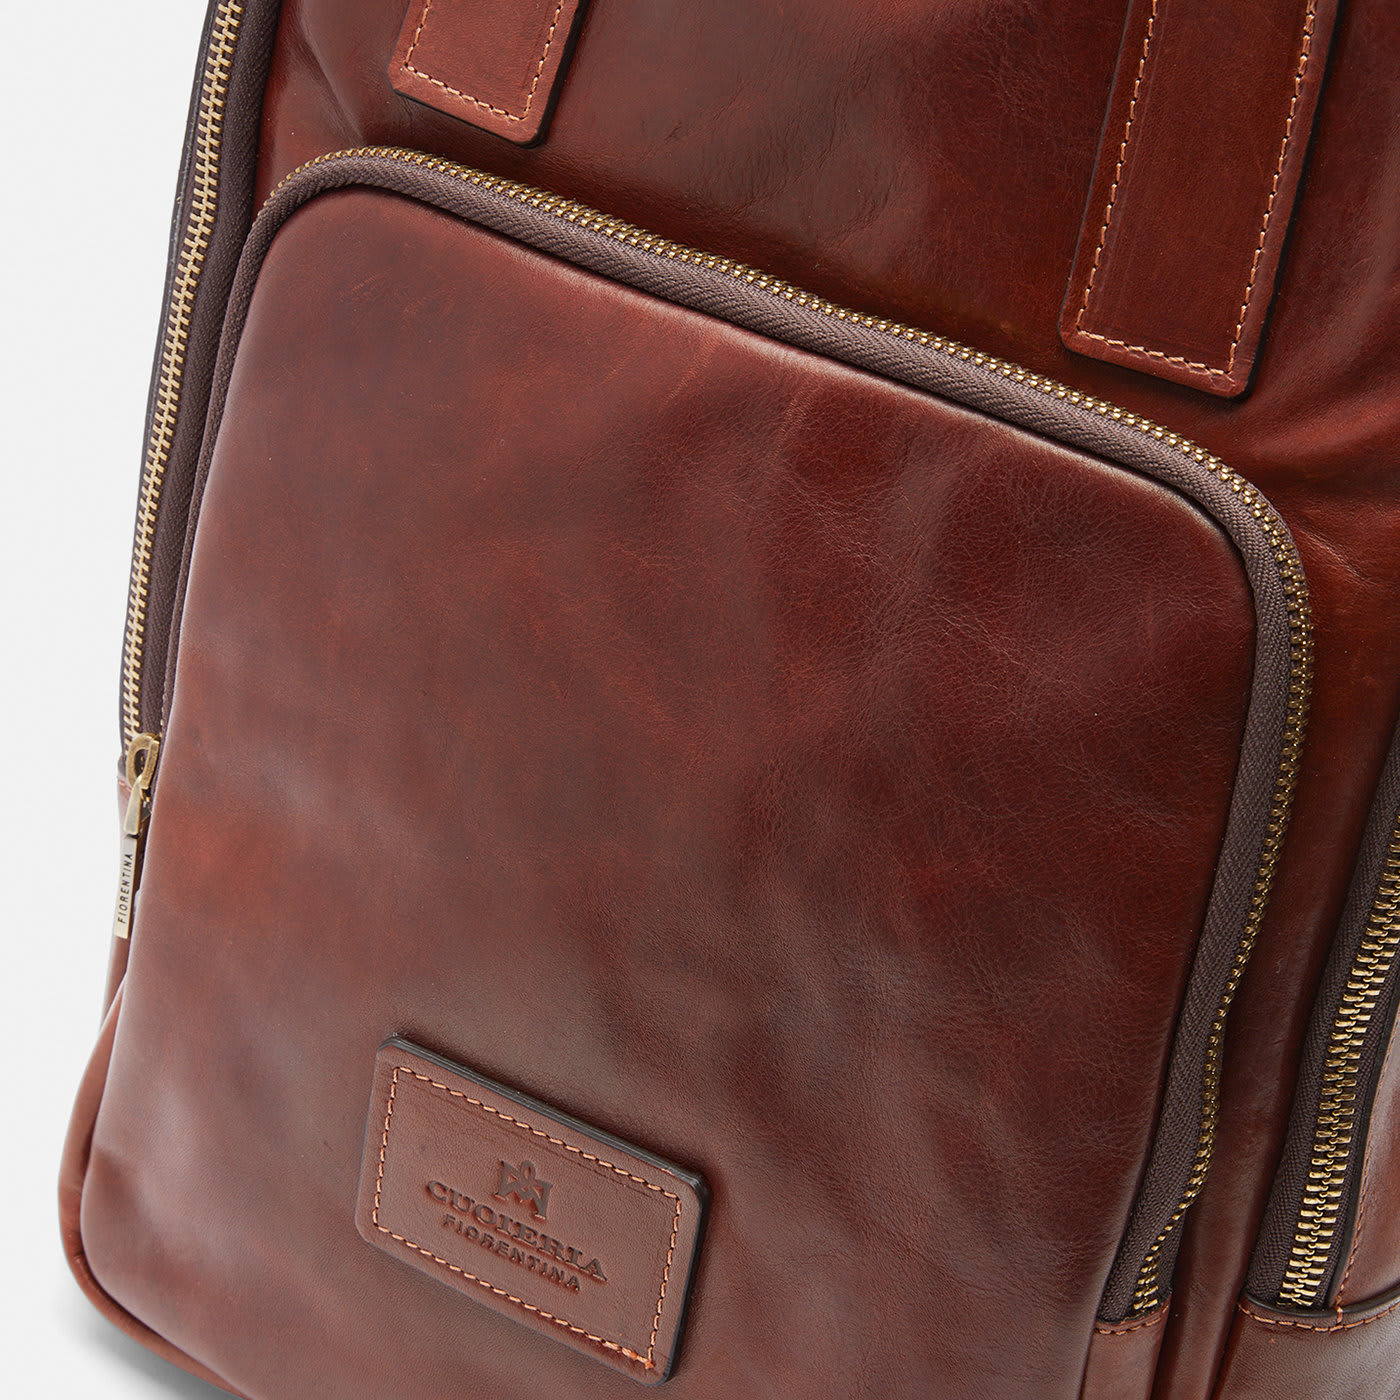 Tokyo Large Brown Backpack - Cuoieria Fiorentina